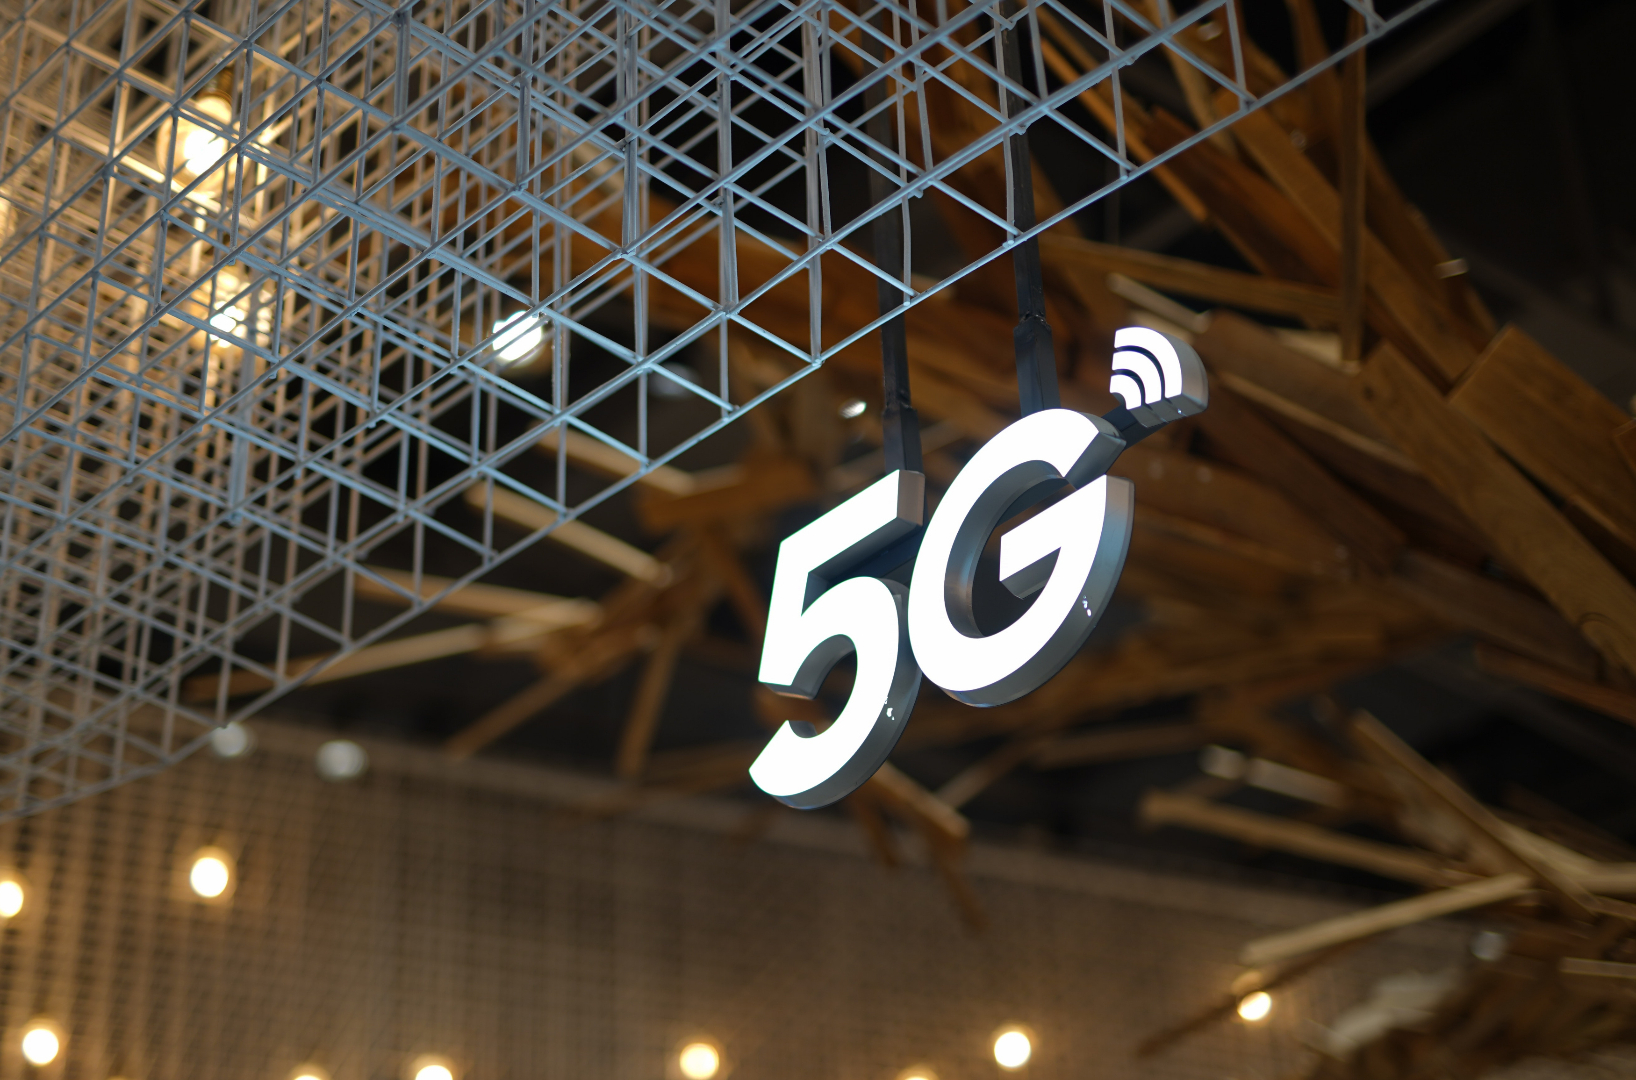 Telcos must comply with govt's 'no extra charge' pledge for 5G: MCMC